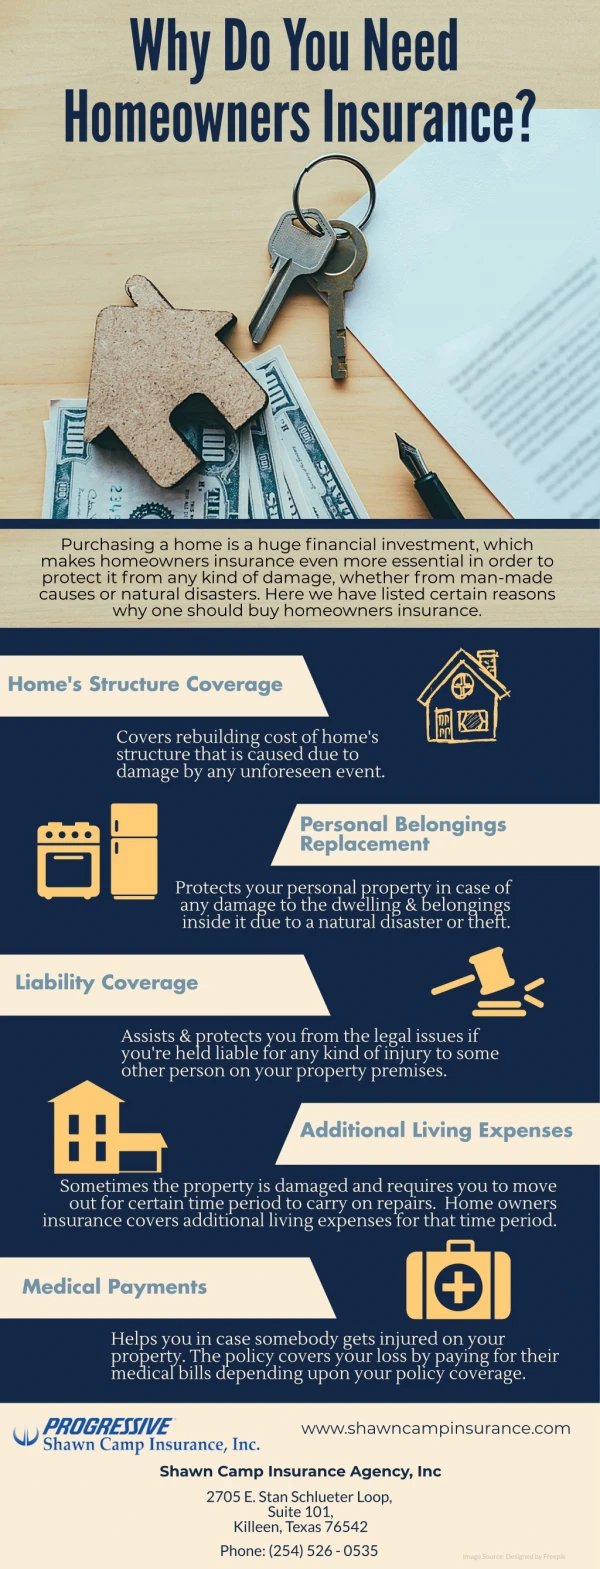 Why Do You Need Homeowners Insurance?